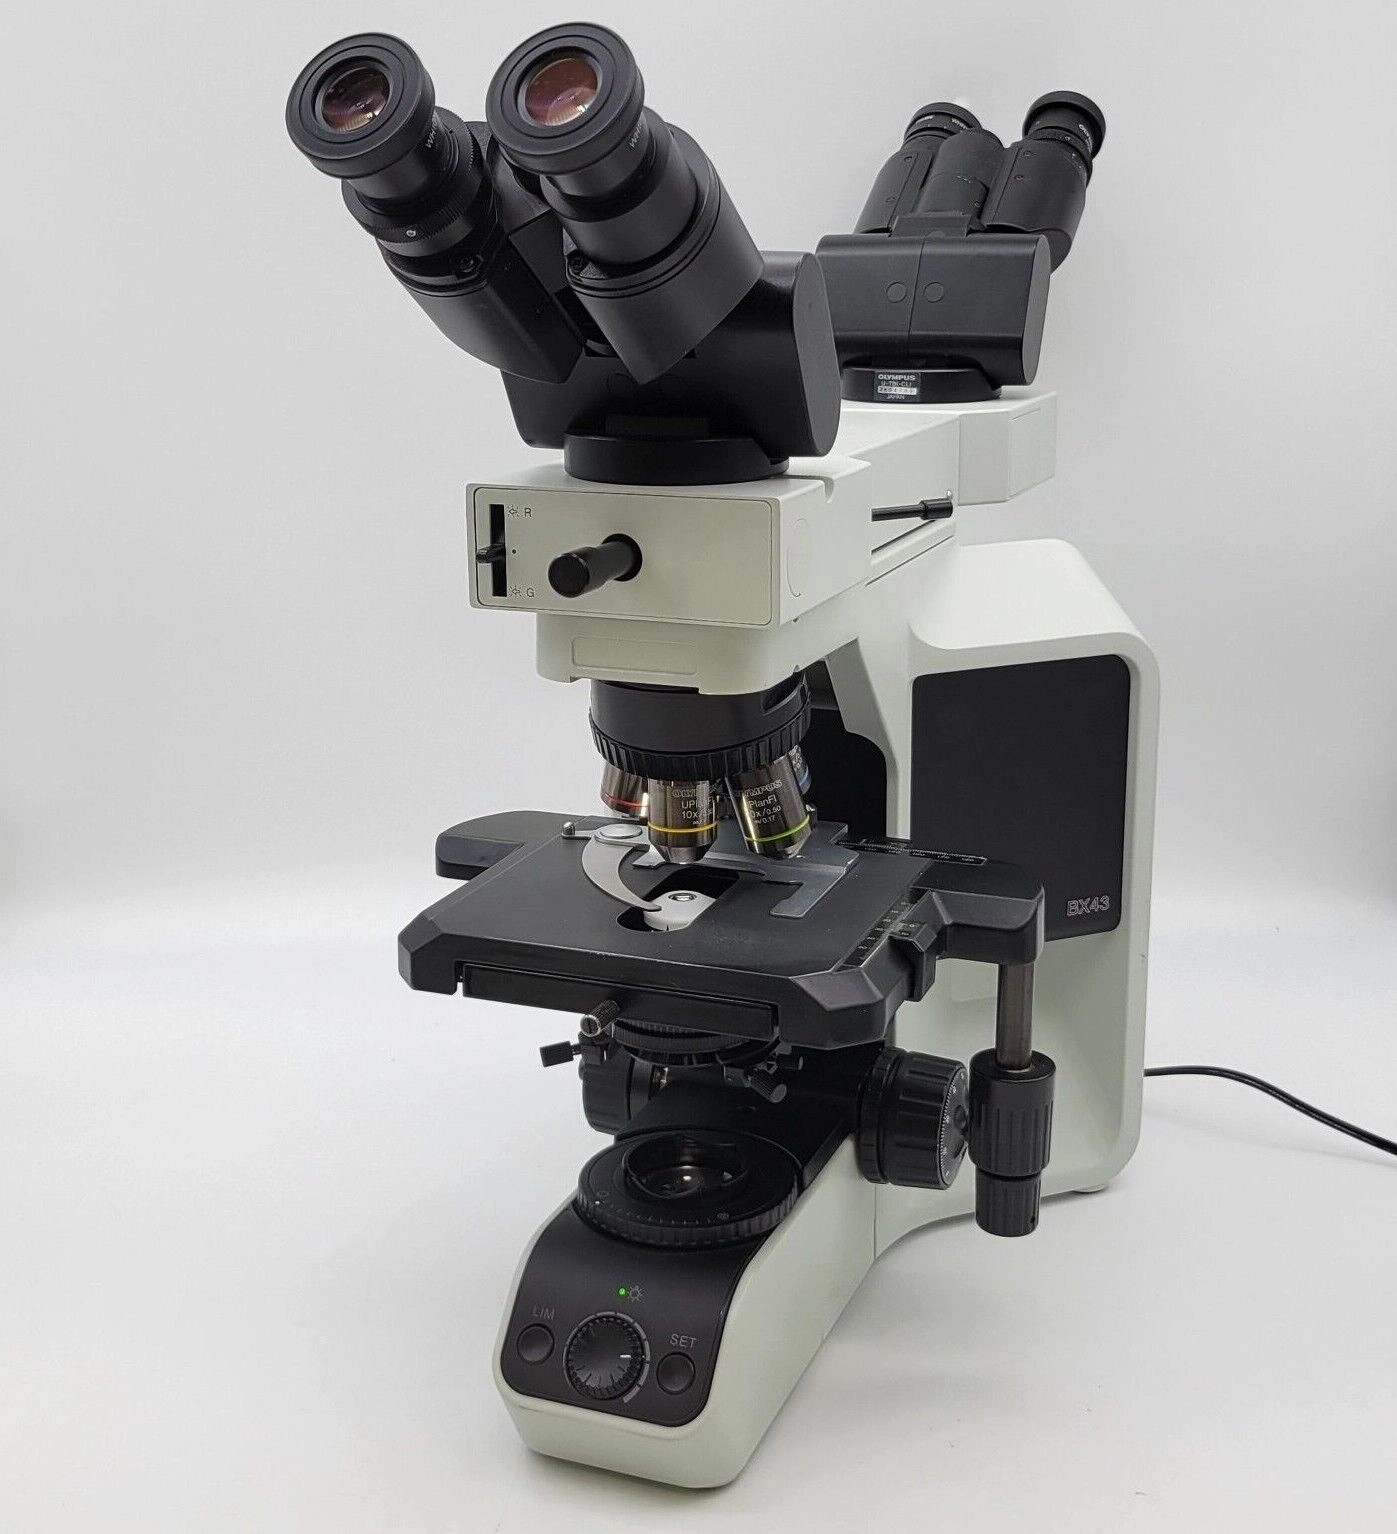 Olympus Microscope BX43 with Fluorites and Front to Back Bridge for Pathology (Dual Head)